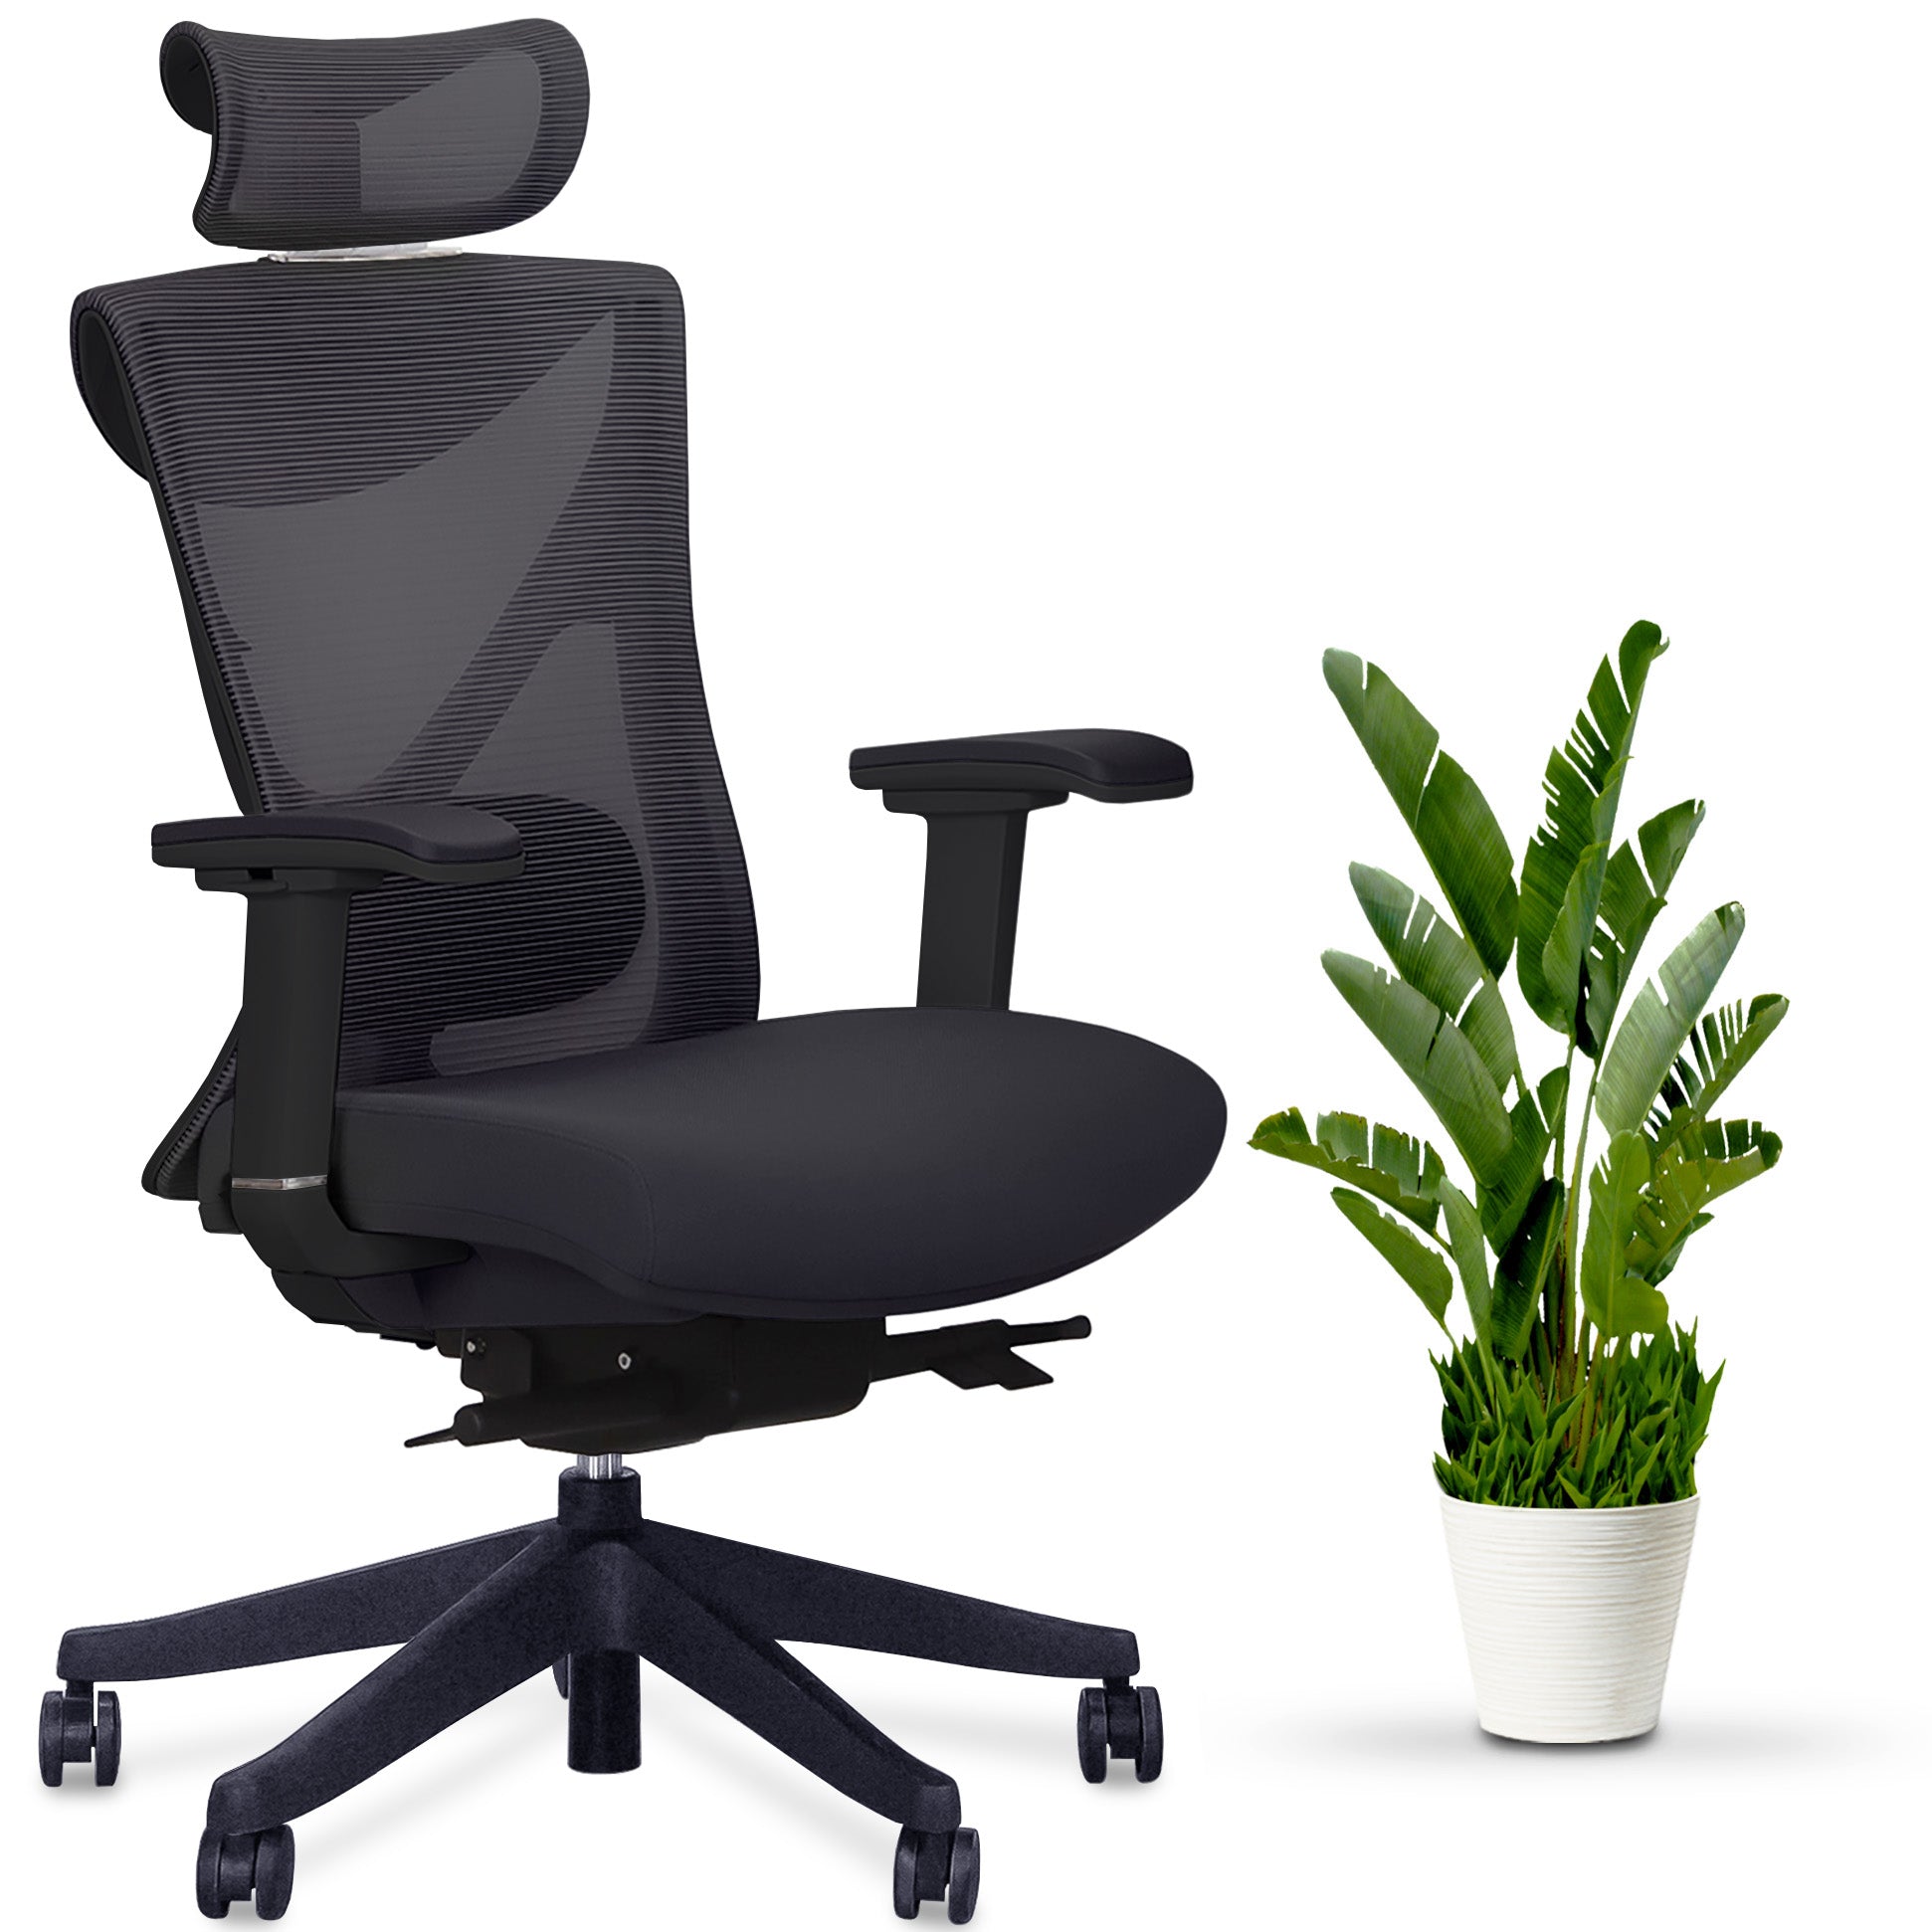 All Mesh Fully-Adjustable Ergo Desk Chair – Because We Chair